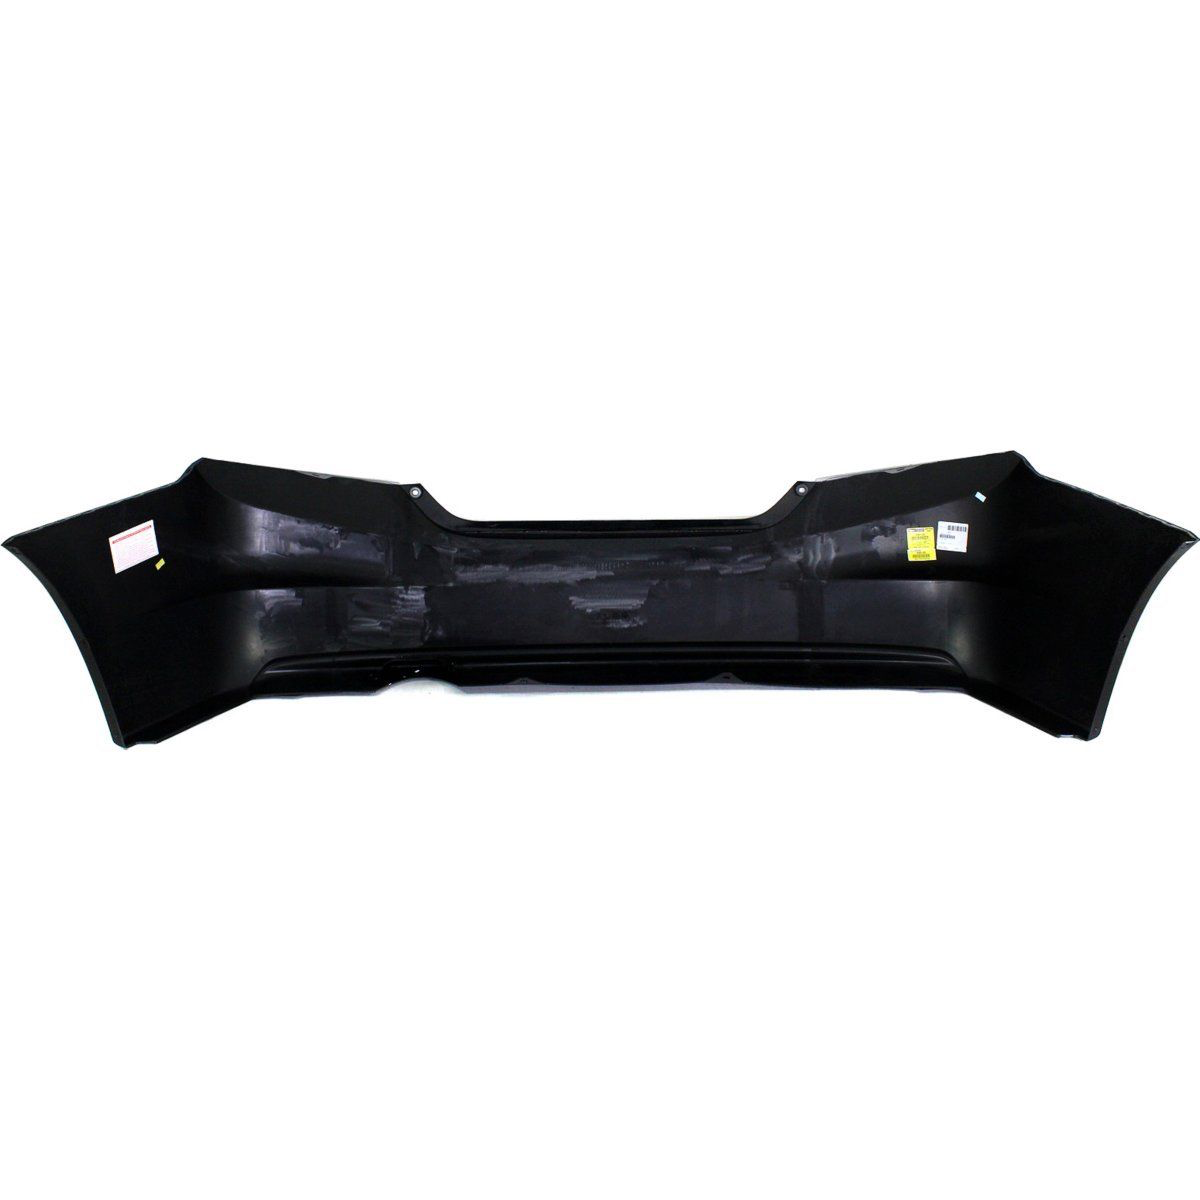 2012-2013 HONDA CIVIC Rear Bumper Cover 1.8L  Coupe Painted to Match